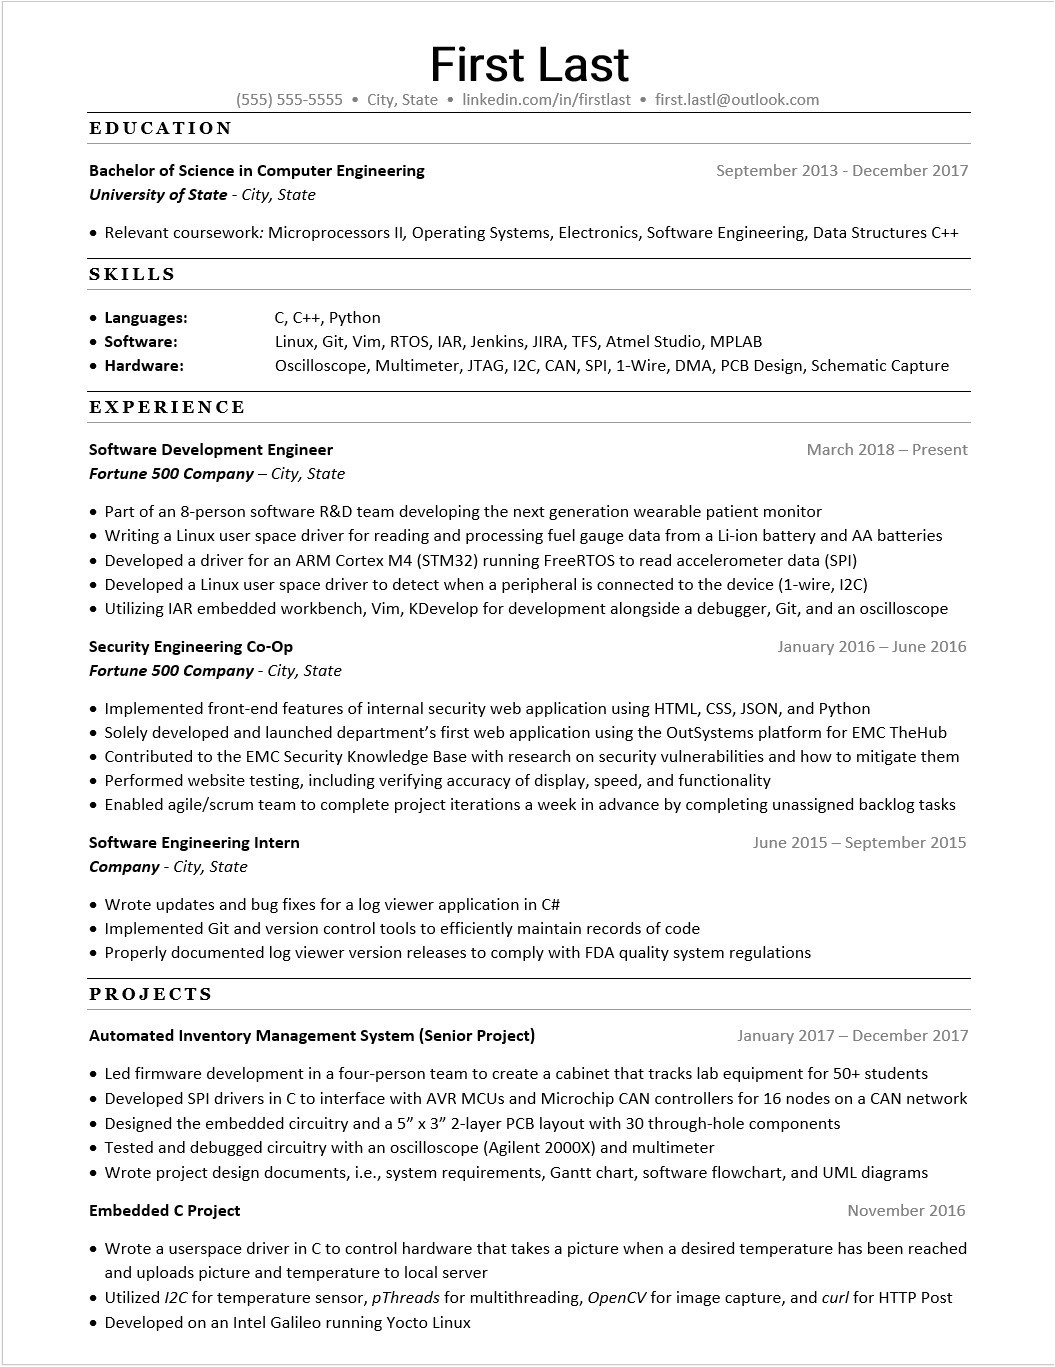 Sample Resume for Experienced Embedded Engineer Embedded Engineer Resume 1 Year Experience